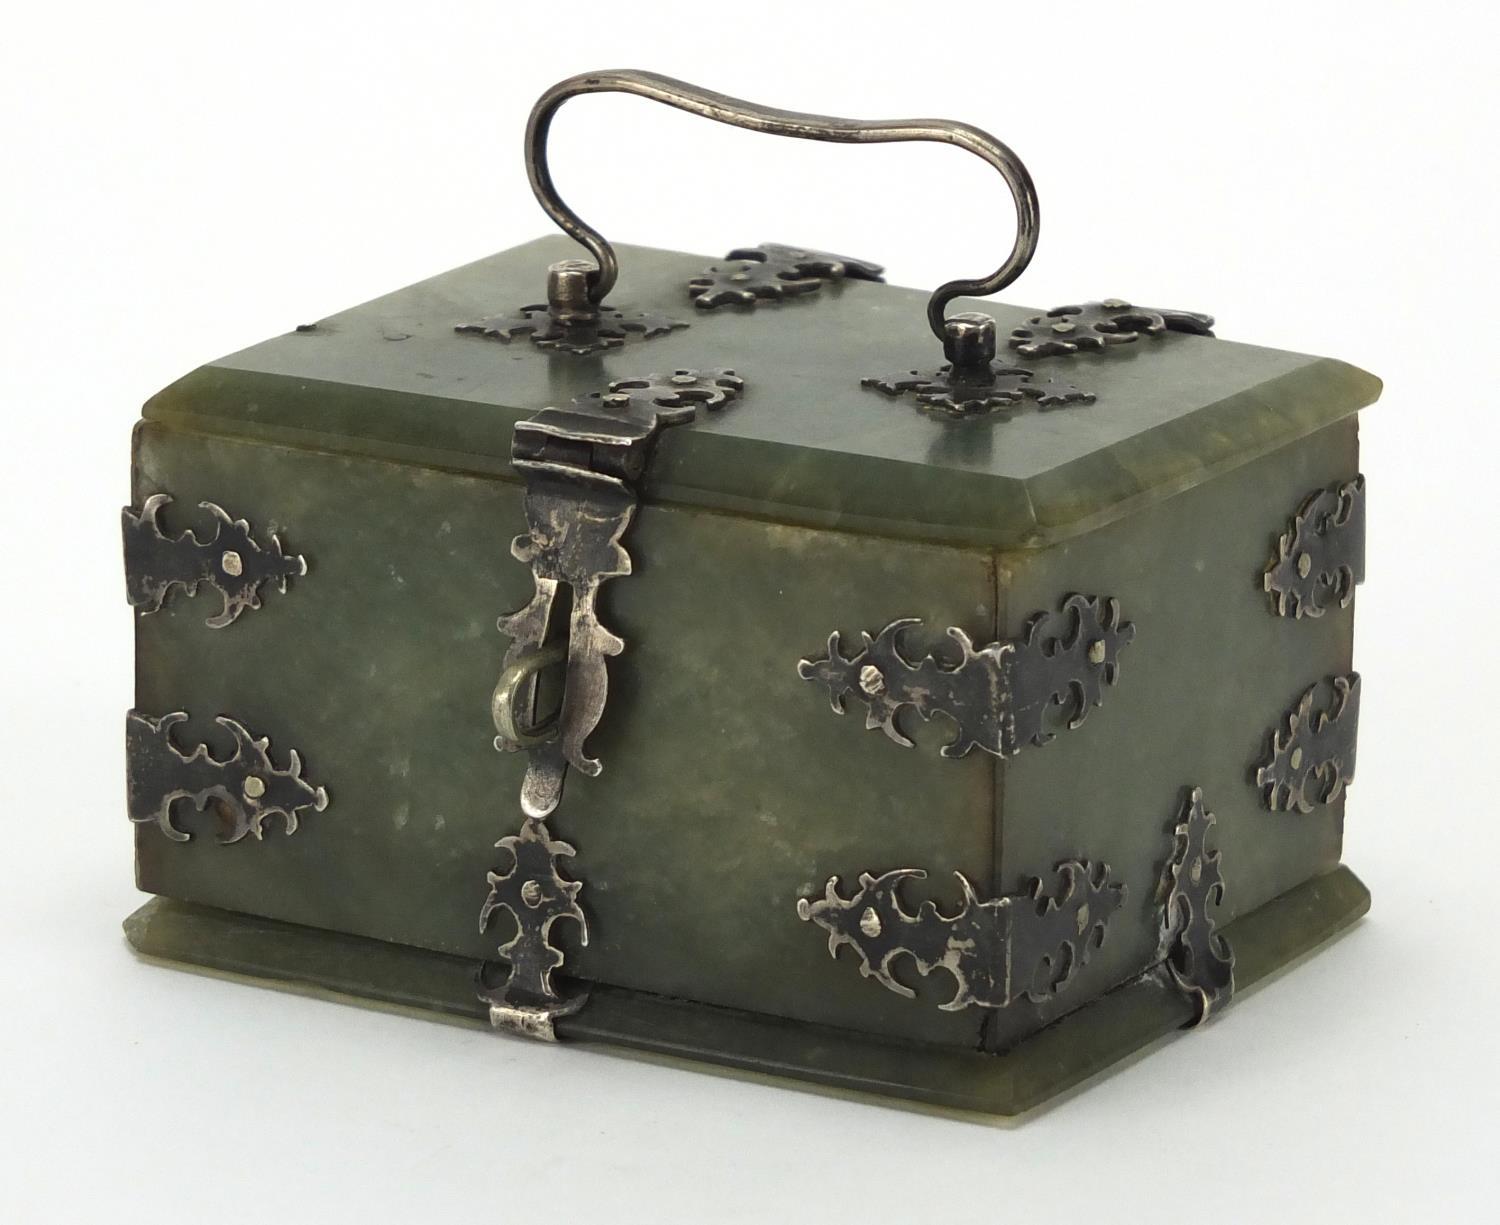 19th century Indian Mughal green jade casket, with silver mounts and swing handle, 5cm H x 9cm W x